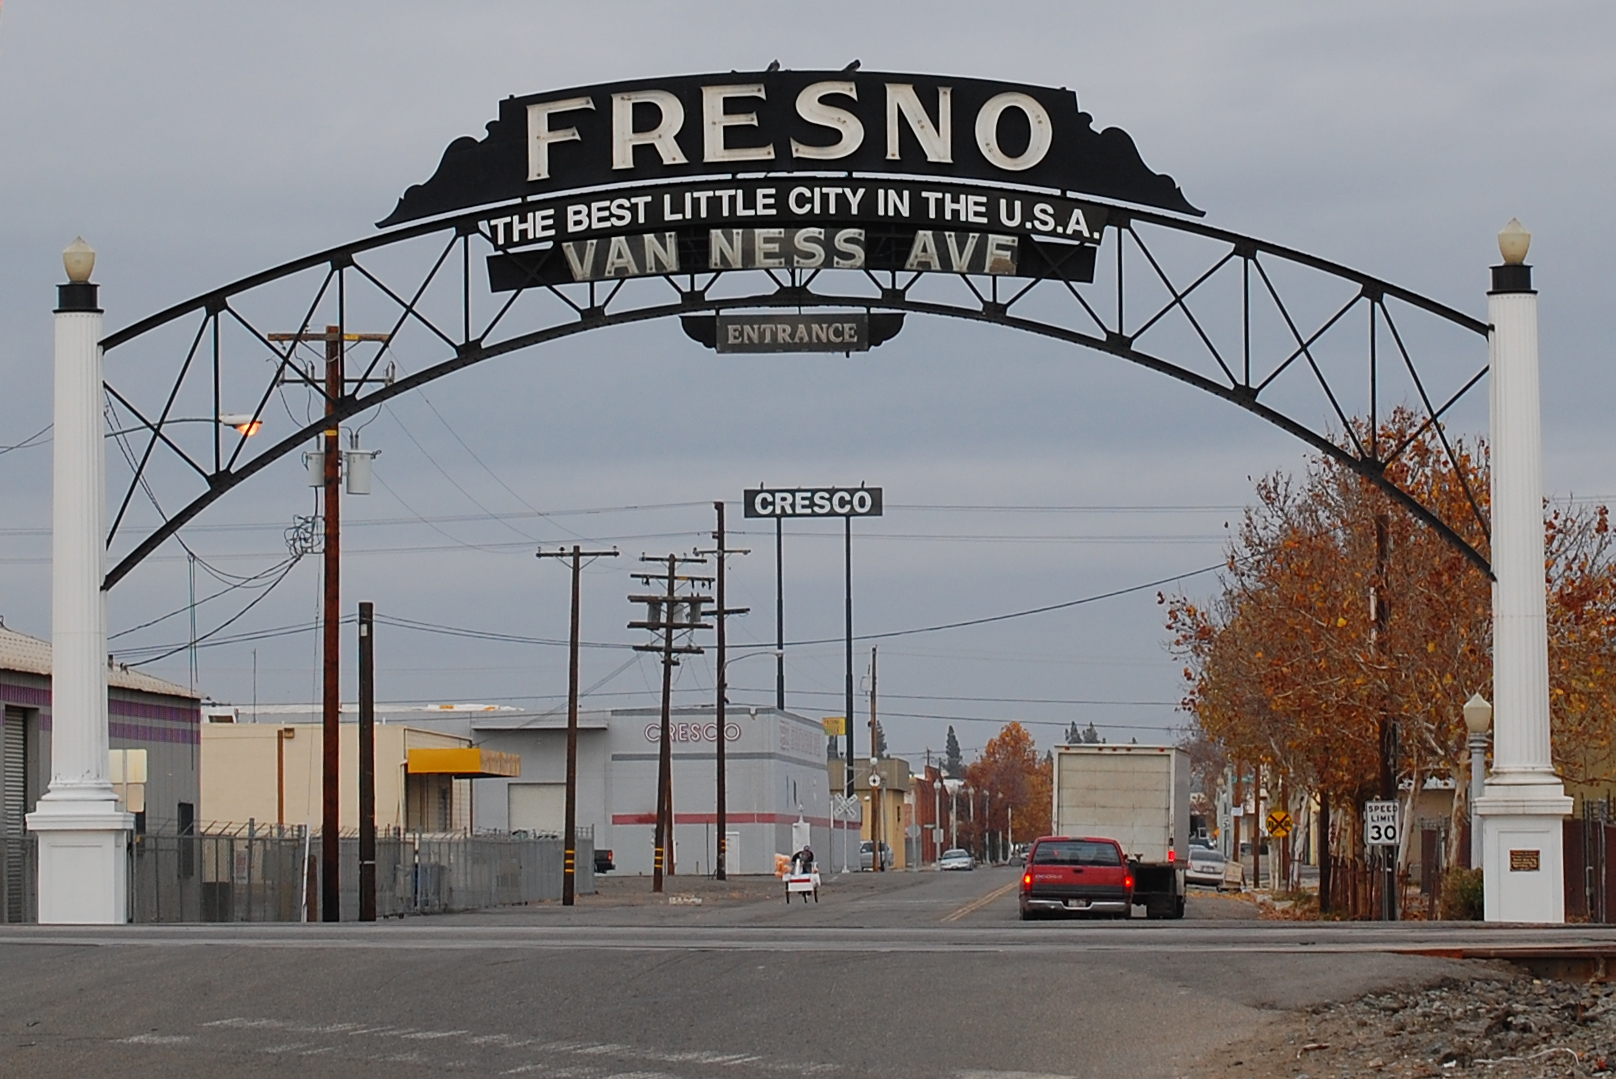 The welcome sign in Fresno California